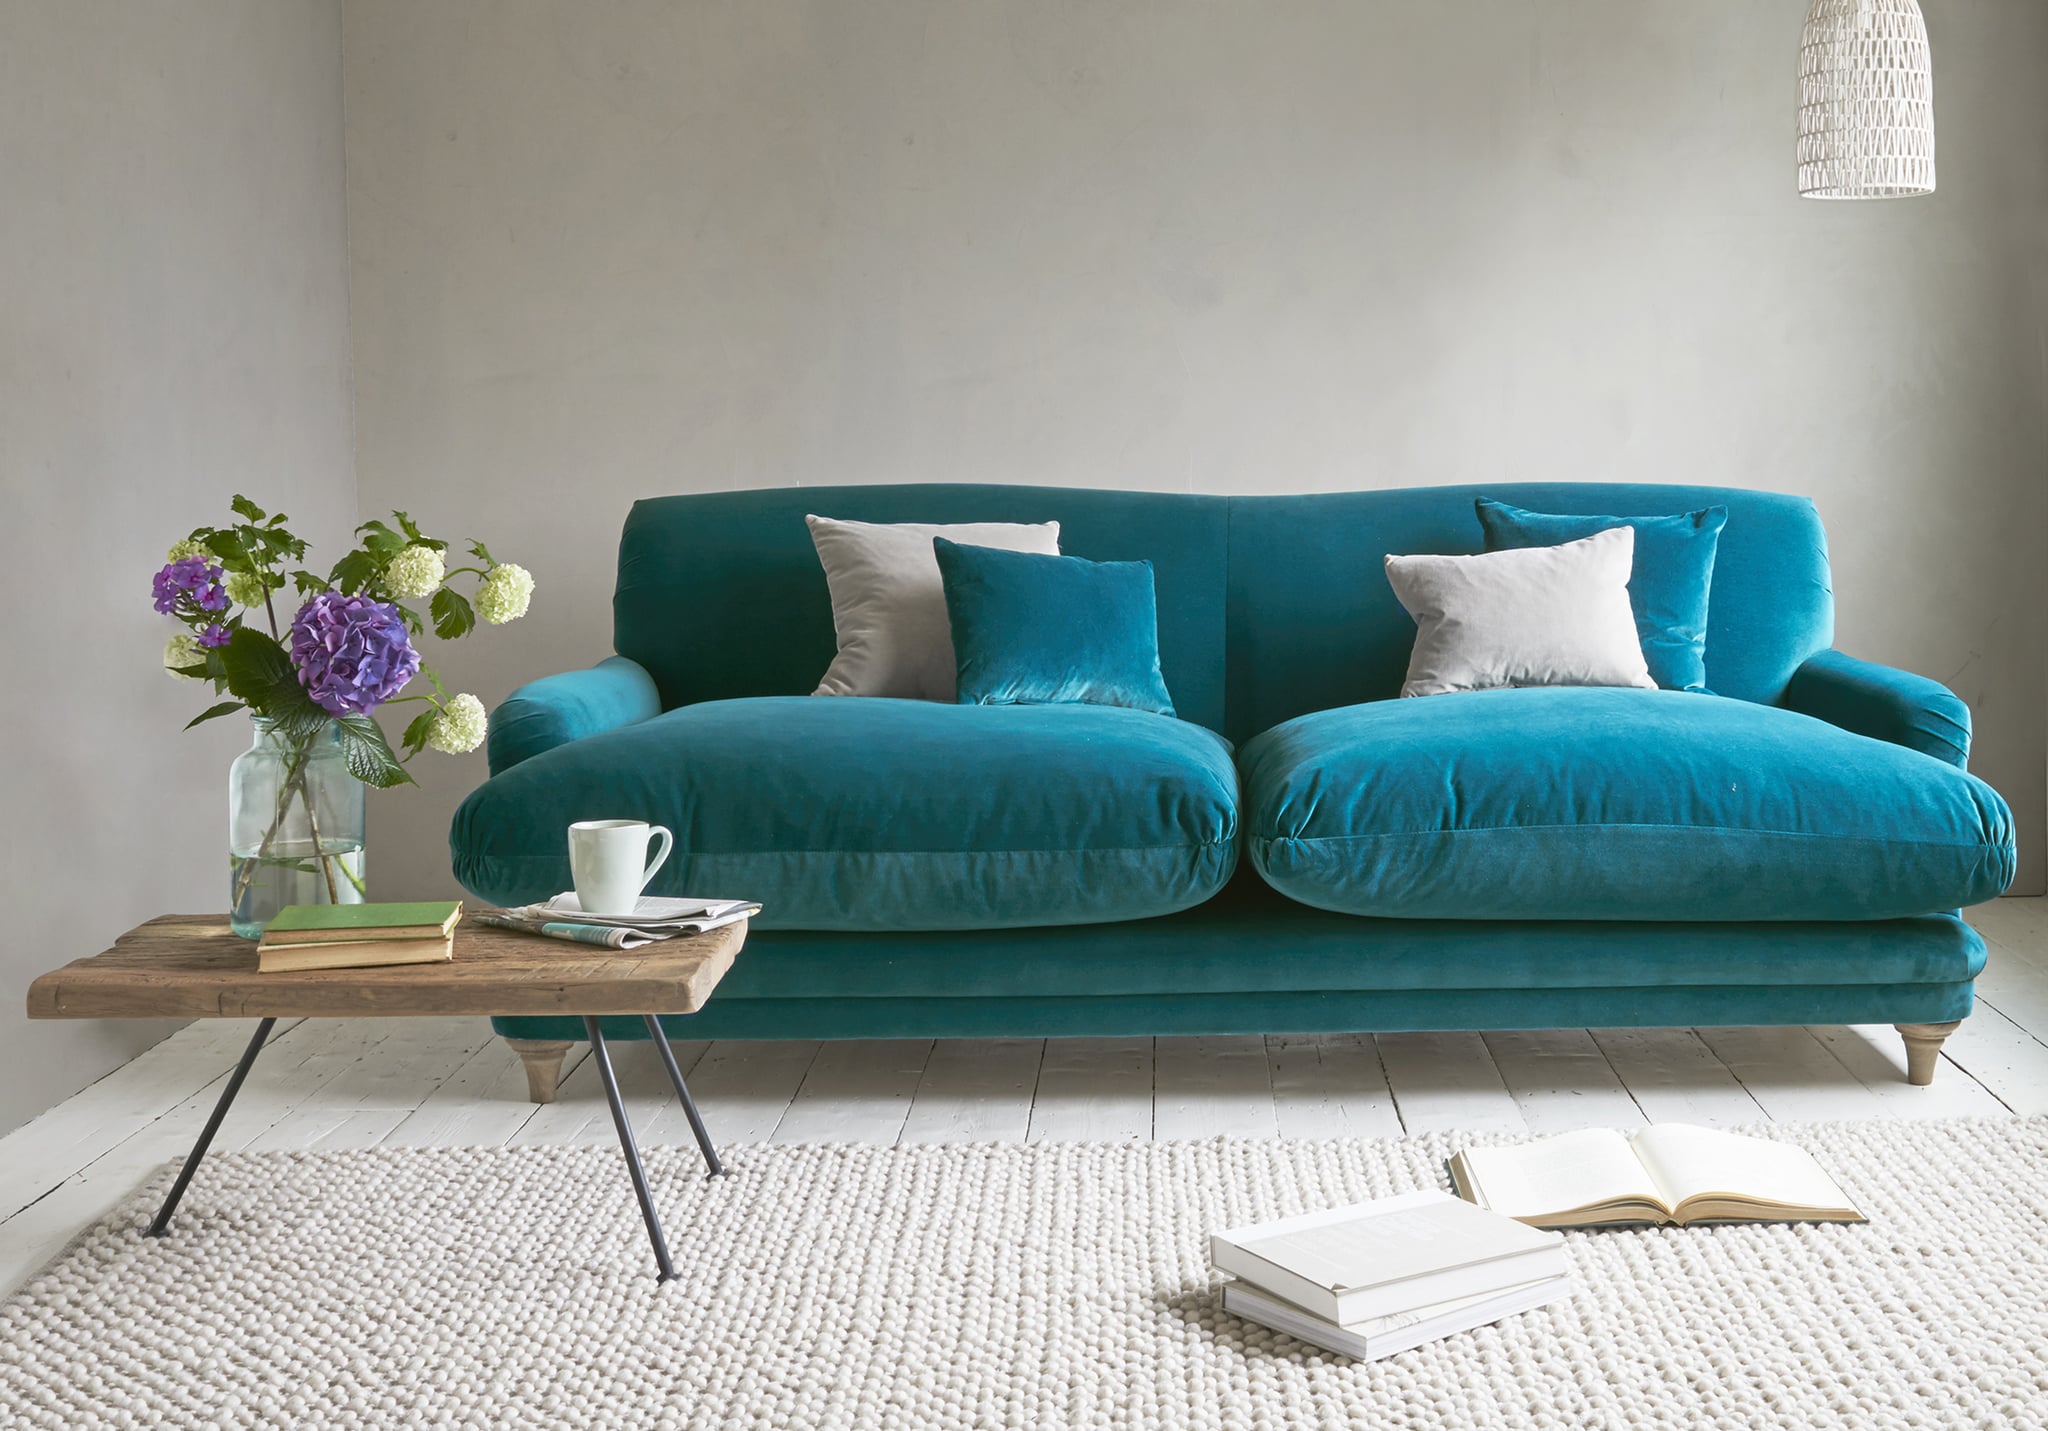 tmp_TmuGPi_68b4292aaf533eca_Loaf_-_Pudding_sofa_in_Real_Teal_clever_velvet_from_1195_high-res.1.jpg